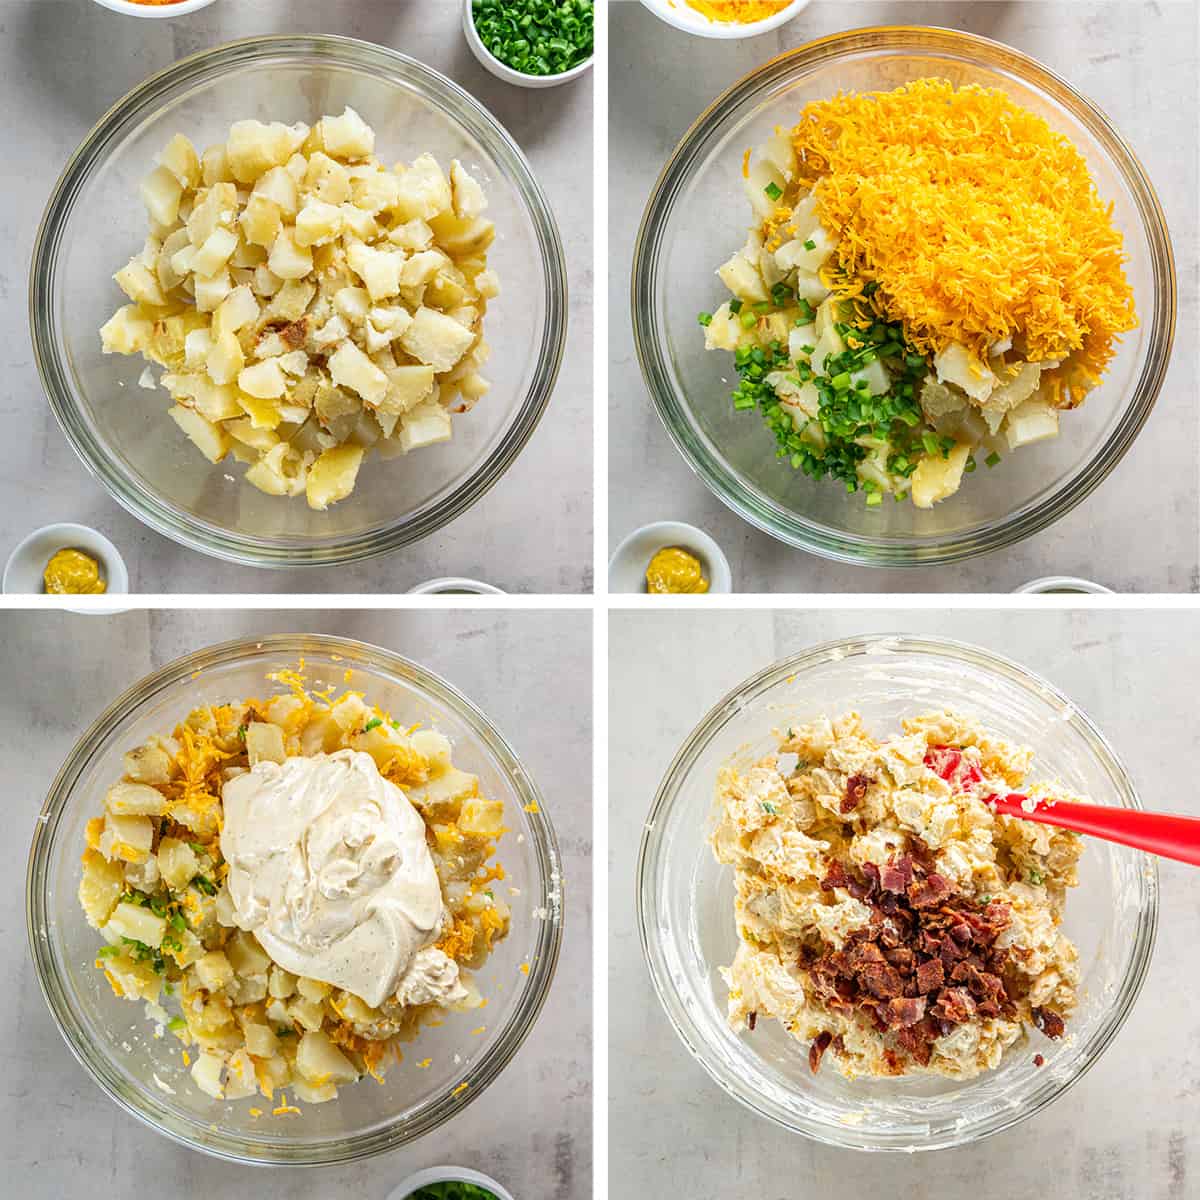 Four images of chopped baked potatoes being combined with other ingredients in a large glass bowl.